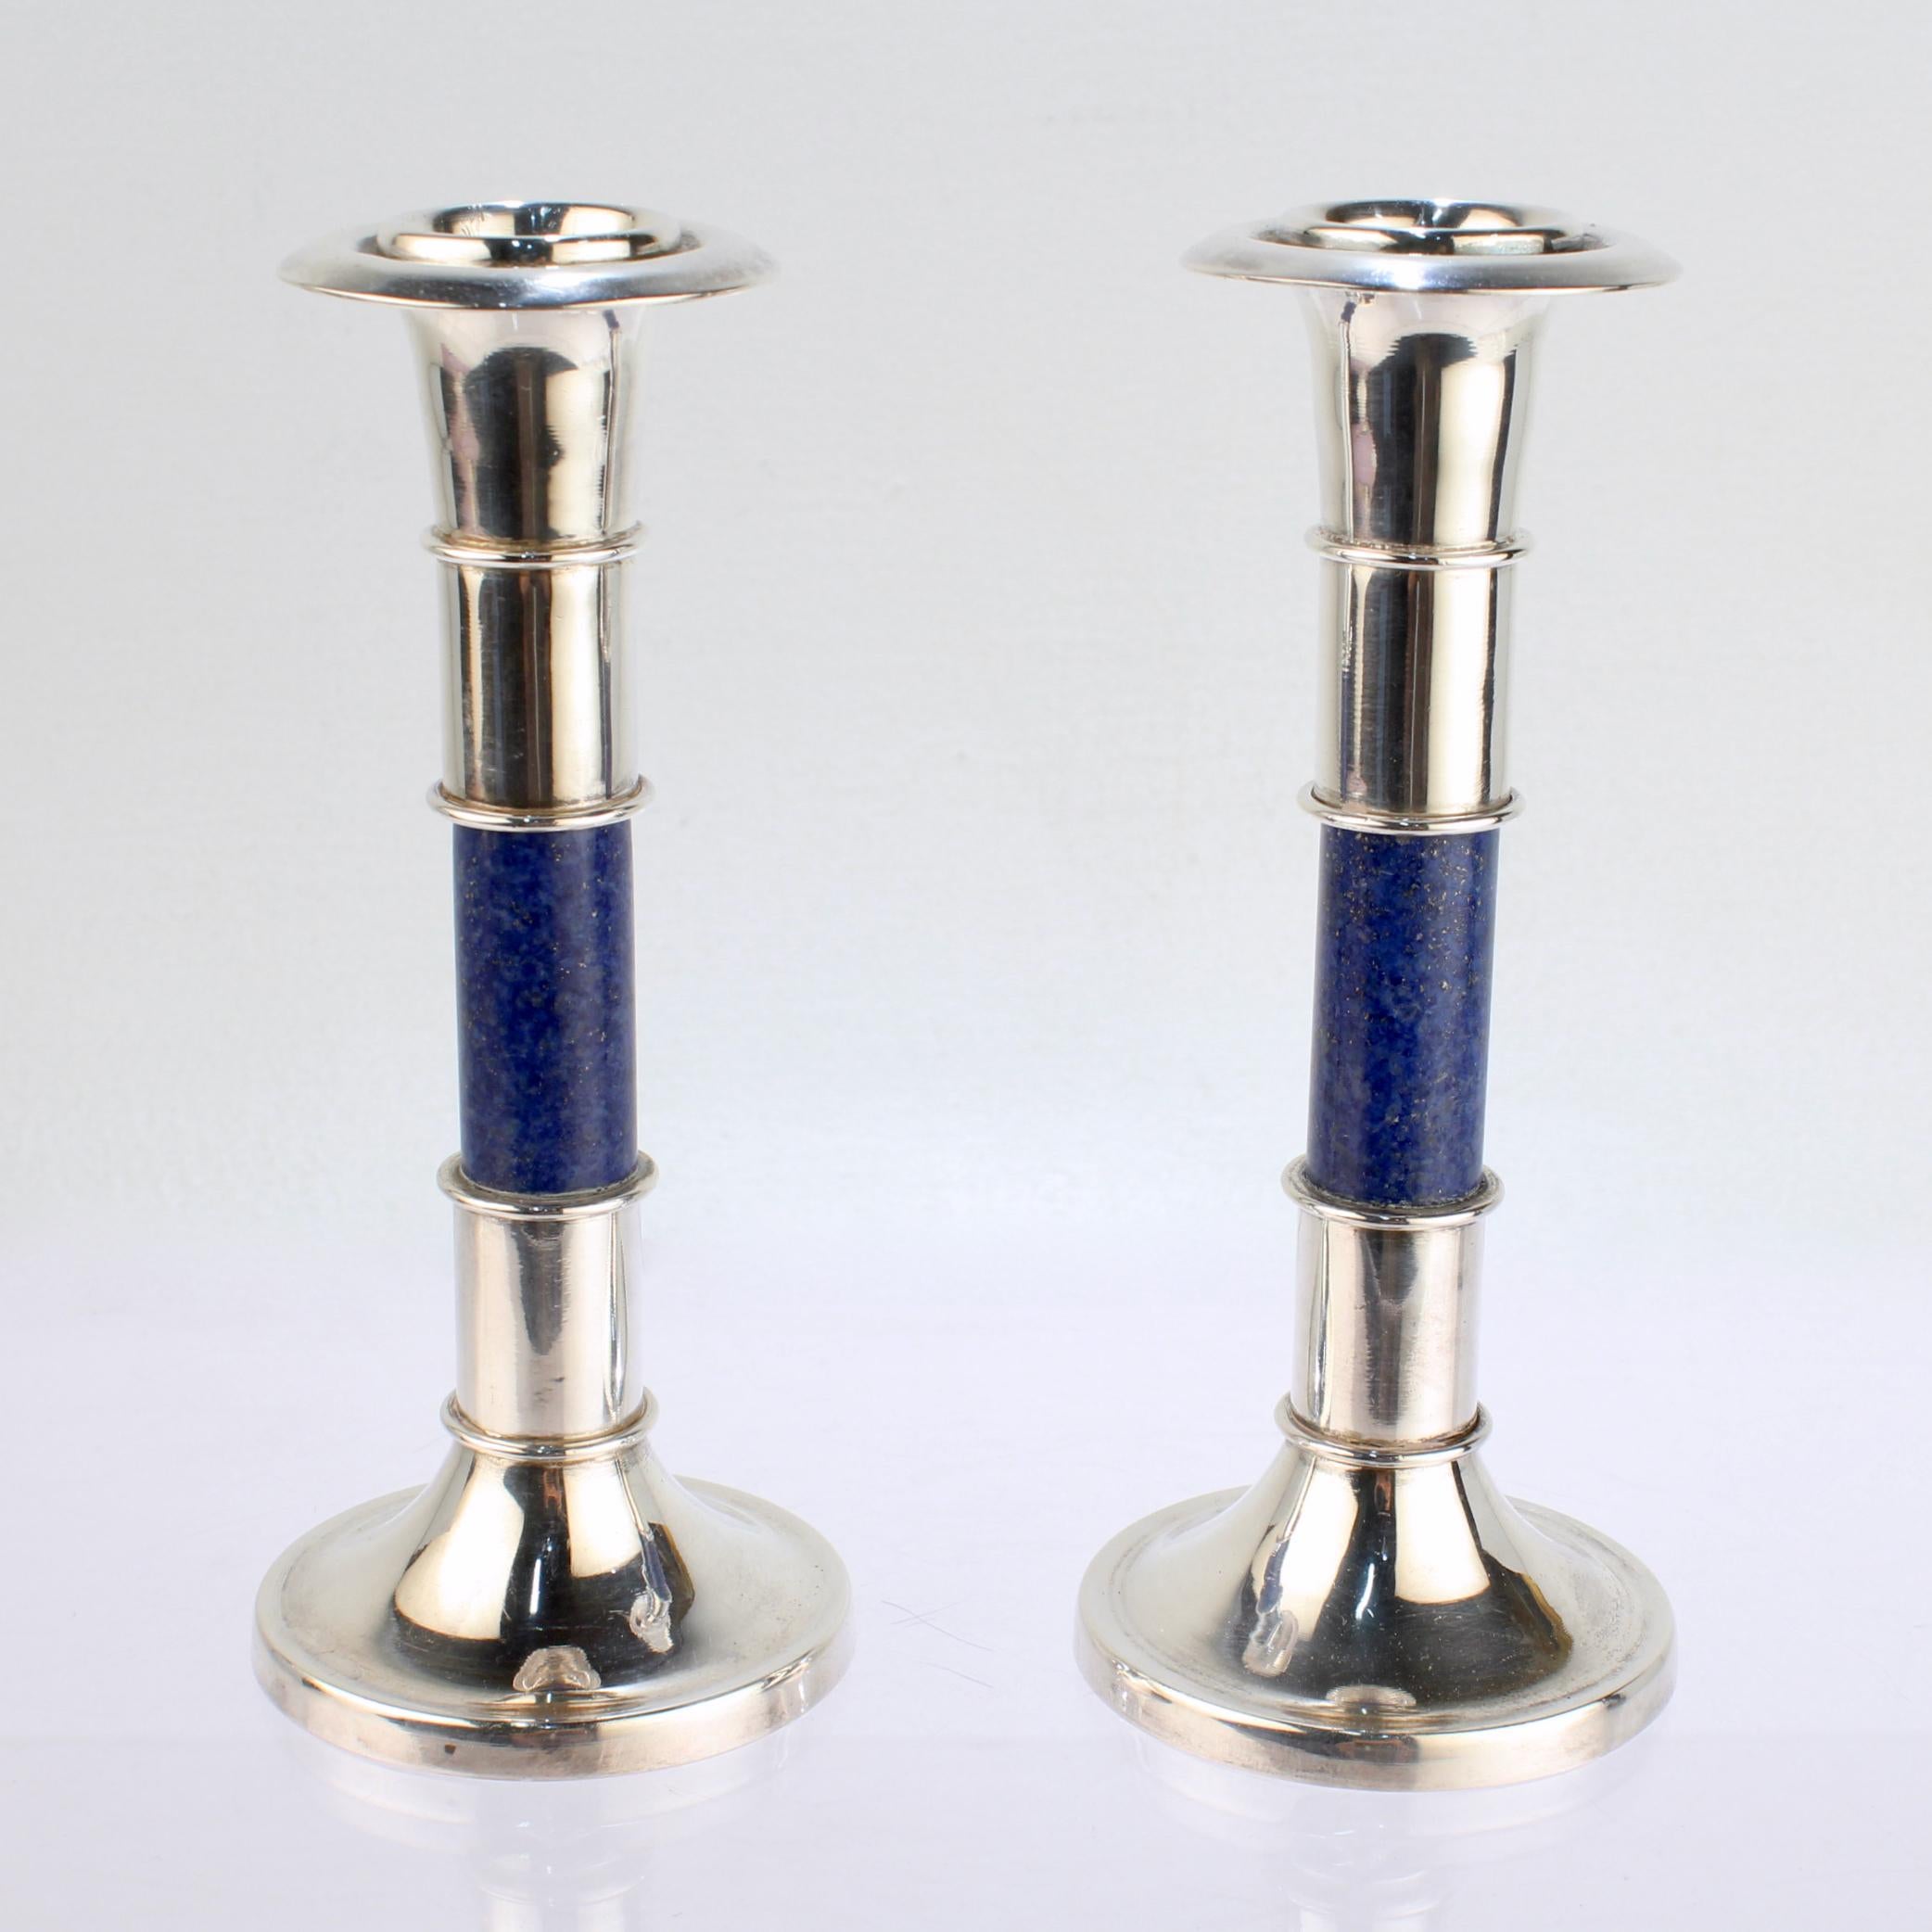 Round Cut Pair of Sterling Silver & Lapis Lazuli Candlesticks or Candle Holders